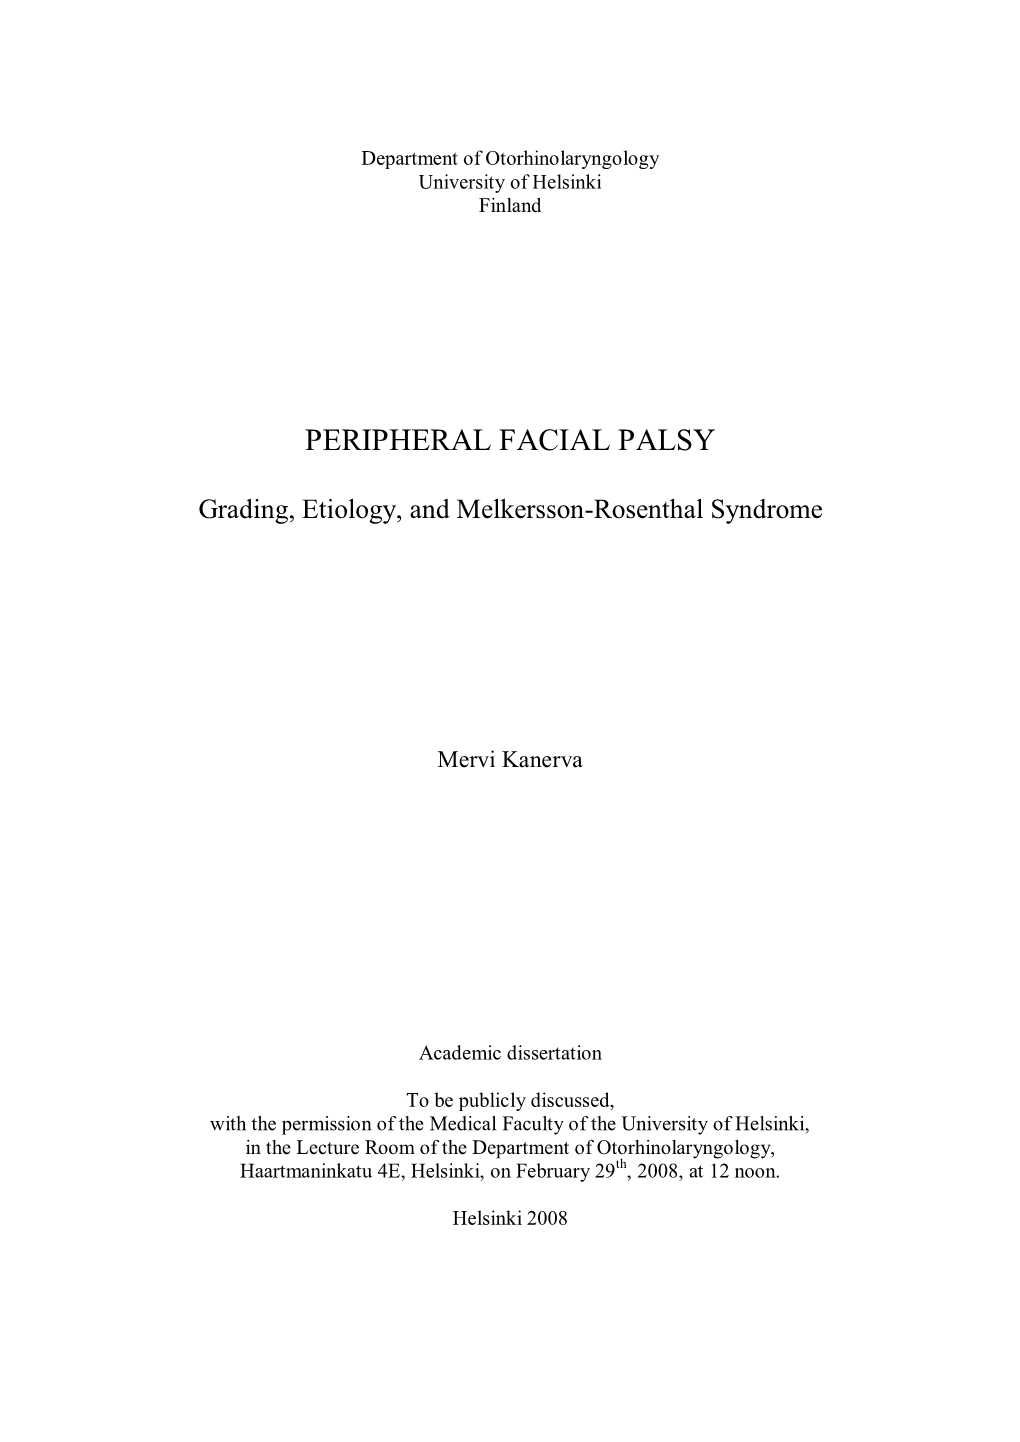 Peripheral Facial Palsy. Grading, Etiology, and Melkersson